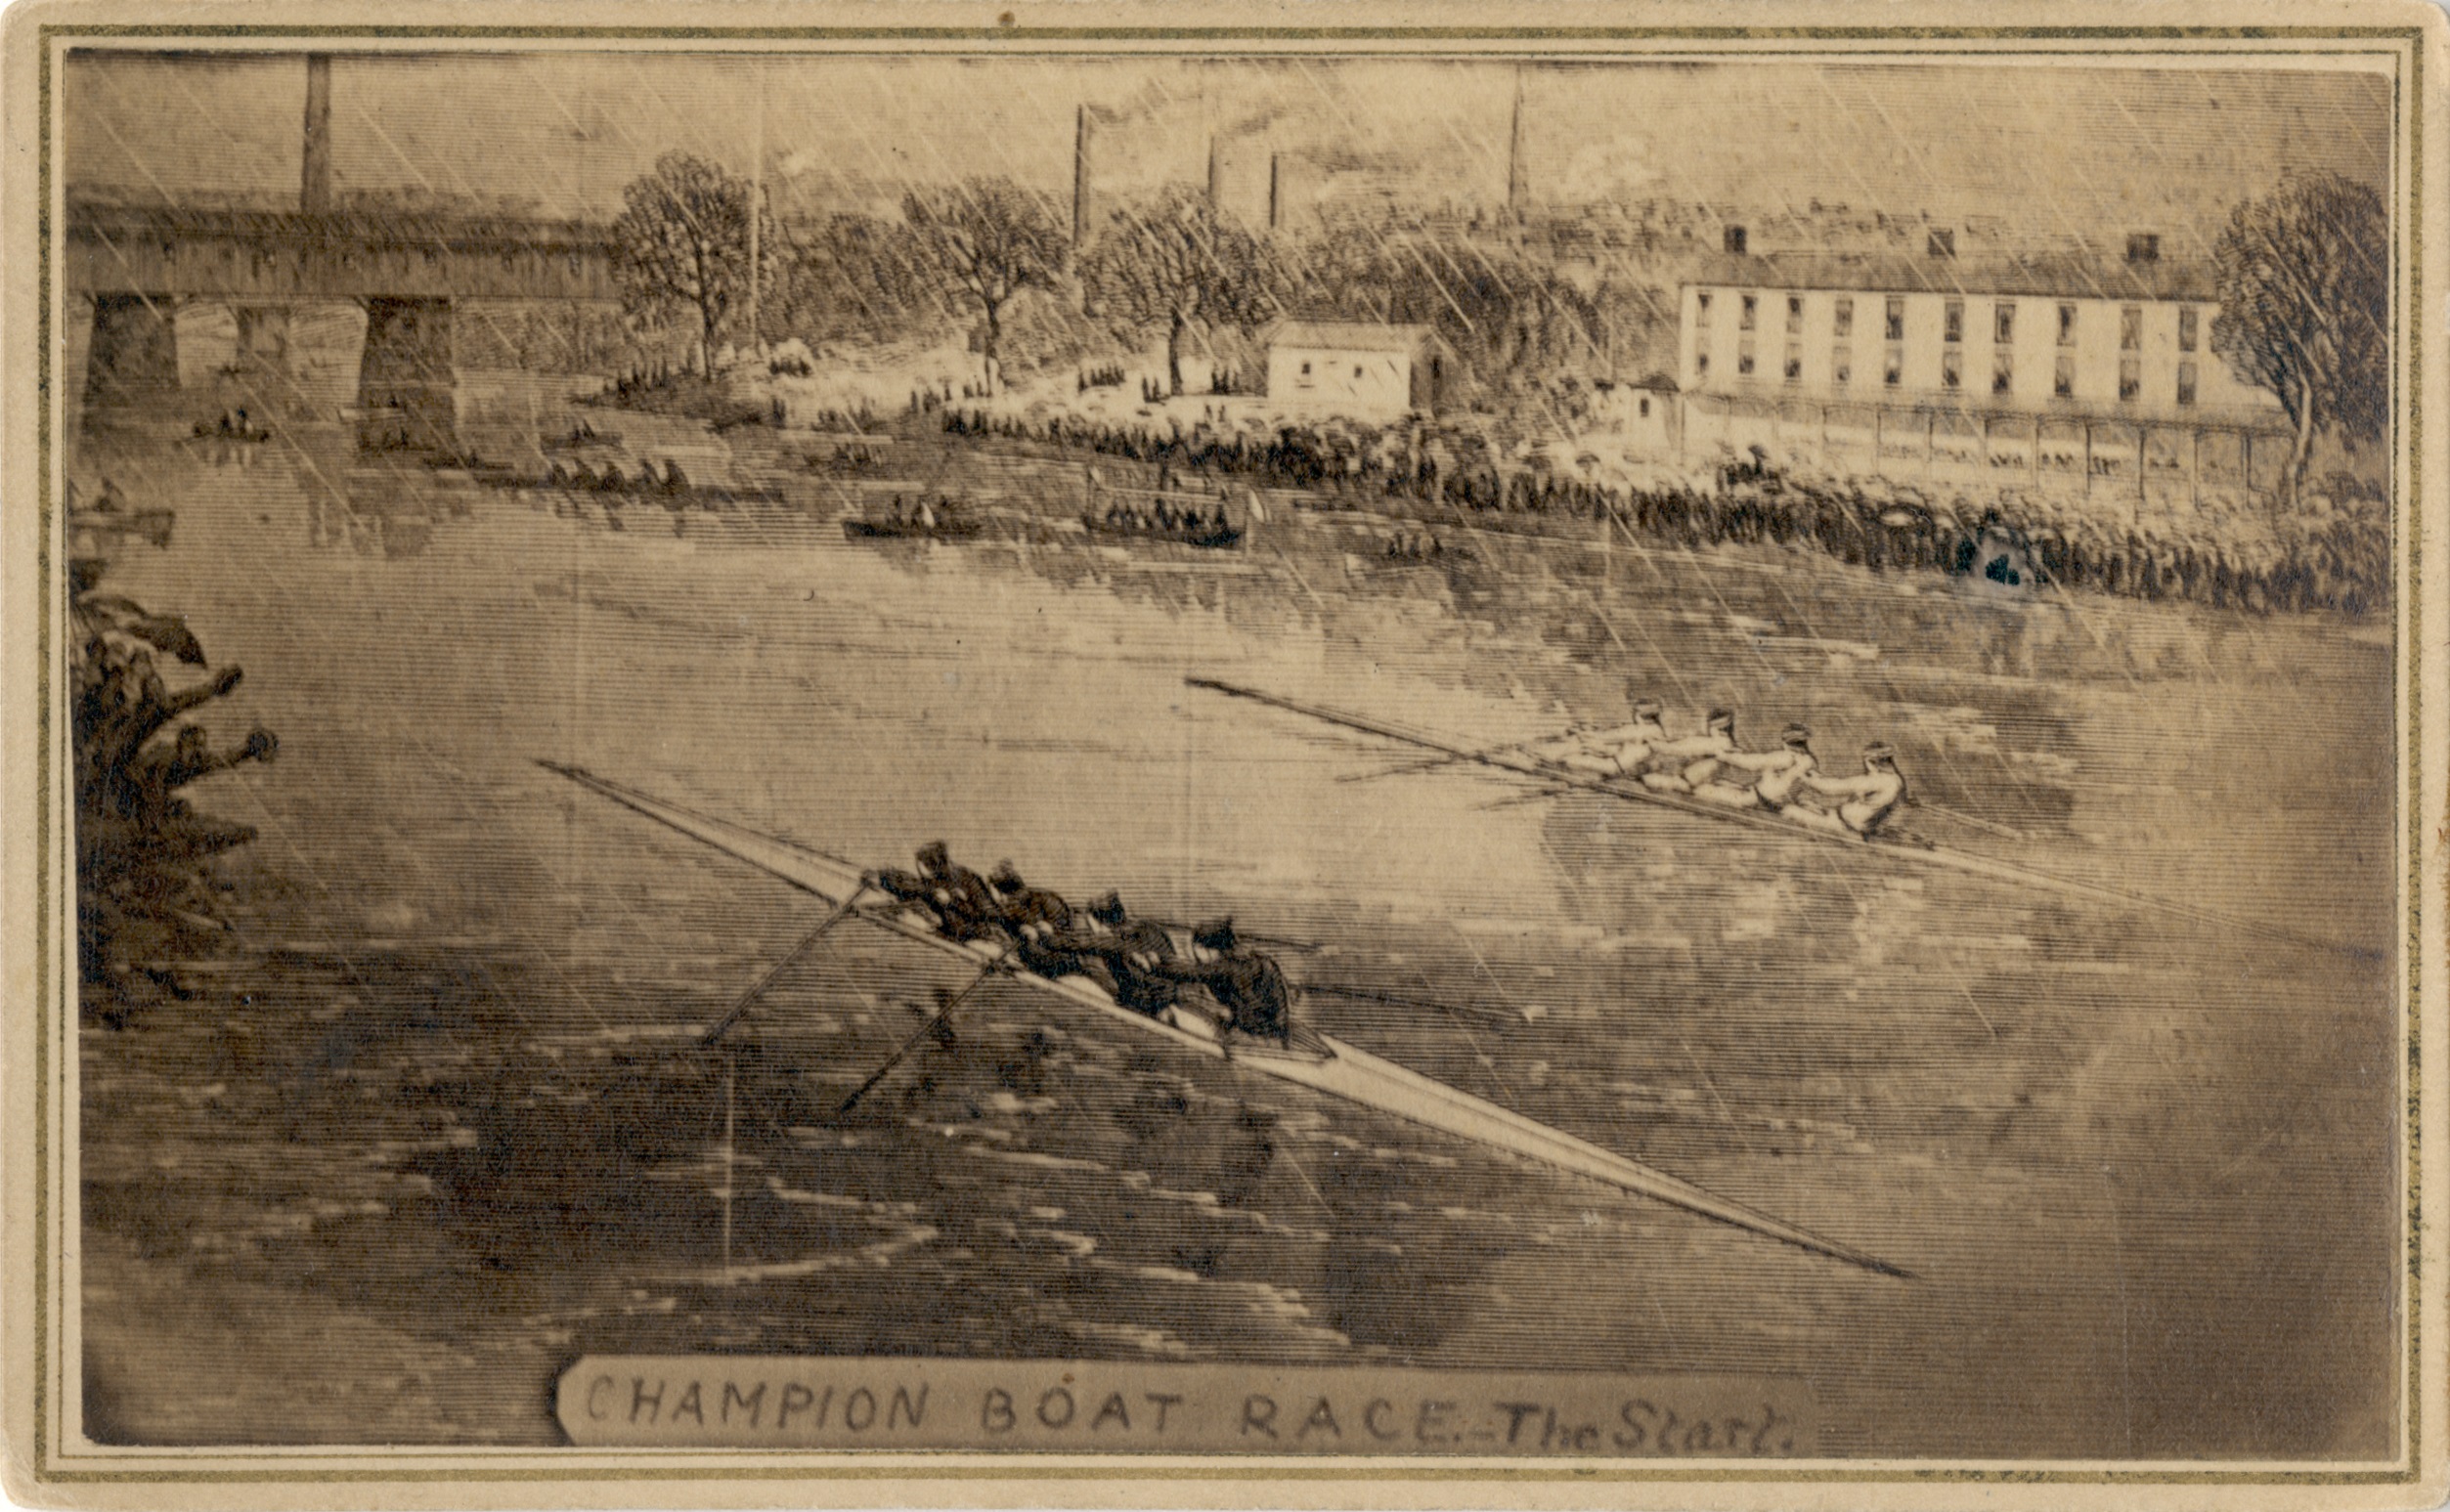 An artist sketch of the rowing crew from Saint John, New Brunswick during one of their races at the International Rowing Regatta in Paris, France. In the foreground their competitors are dressed in black and the Saint John crew is in white. Since the race took place in Paris, there are a number of buildings along the shore line, presumably used for water-based industry, and a bridge passing over the river. Along the bottom of the sketch is a banner that reads "Champion Boat Race. The Start."